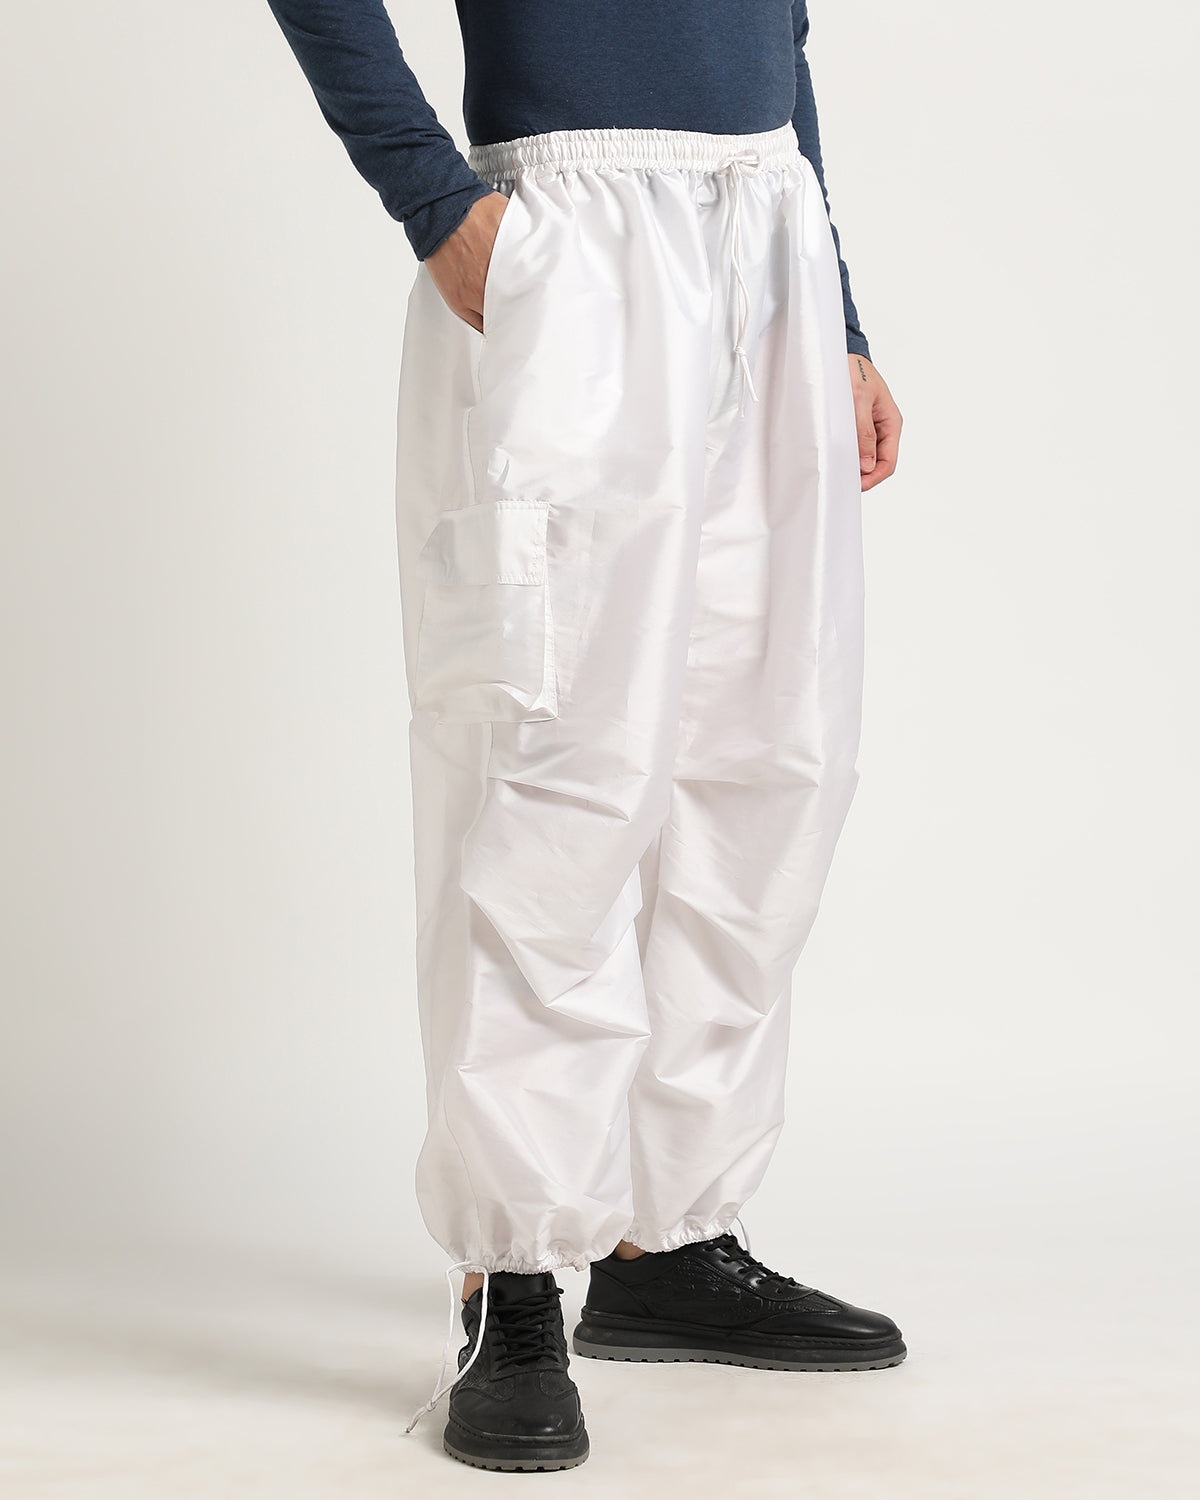 White Recycled Pet Parachute Pants